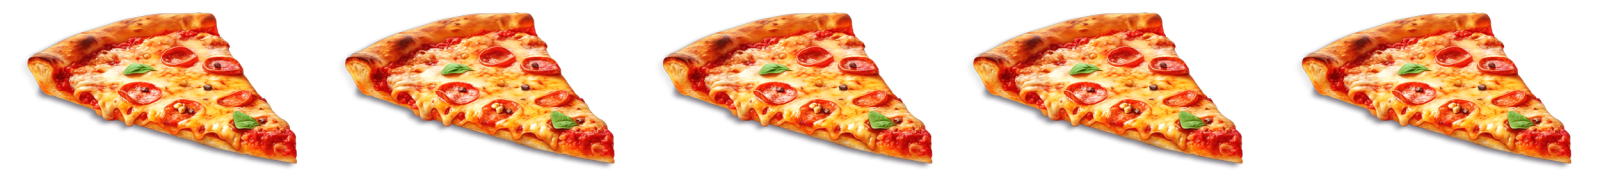 Big Game pizza Slices